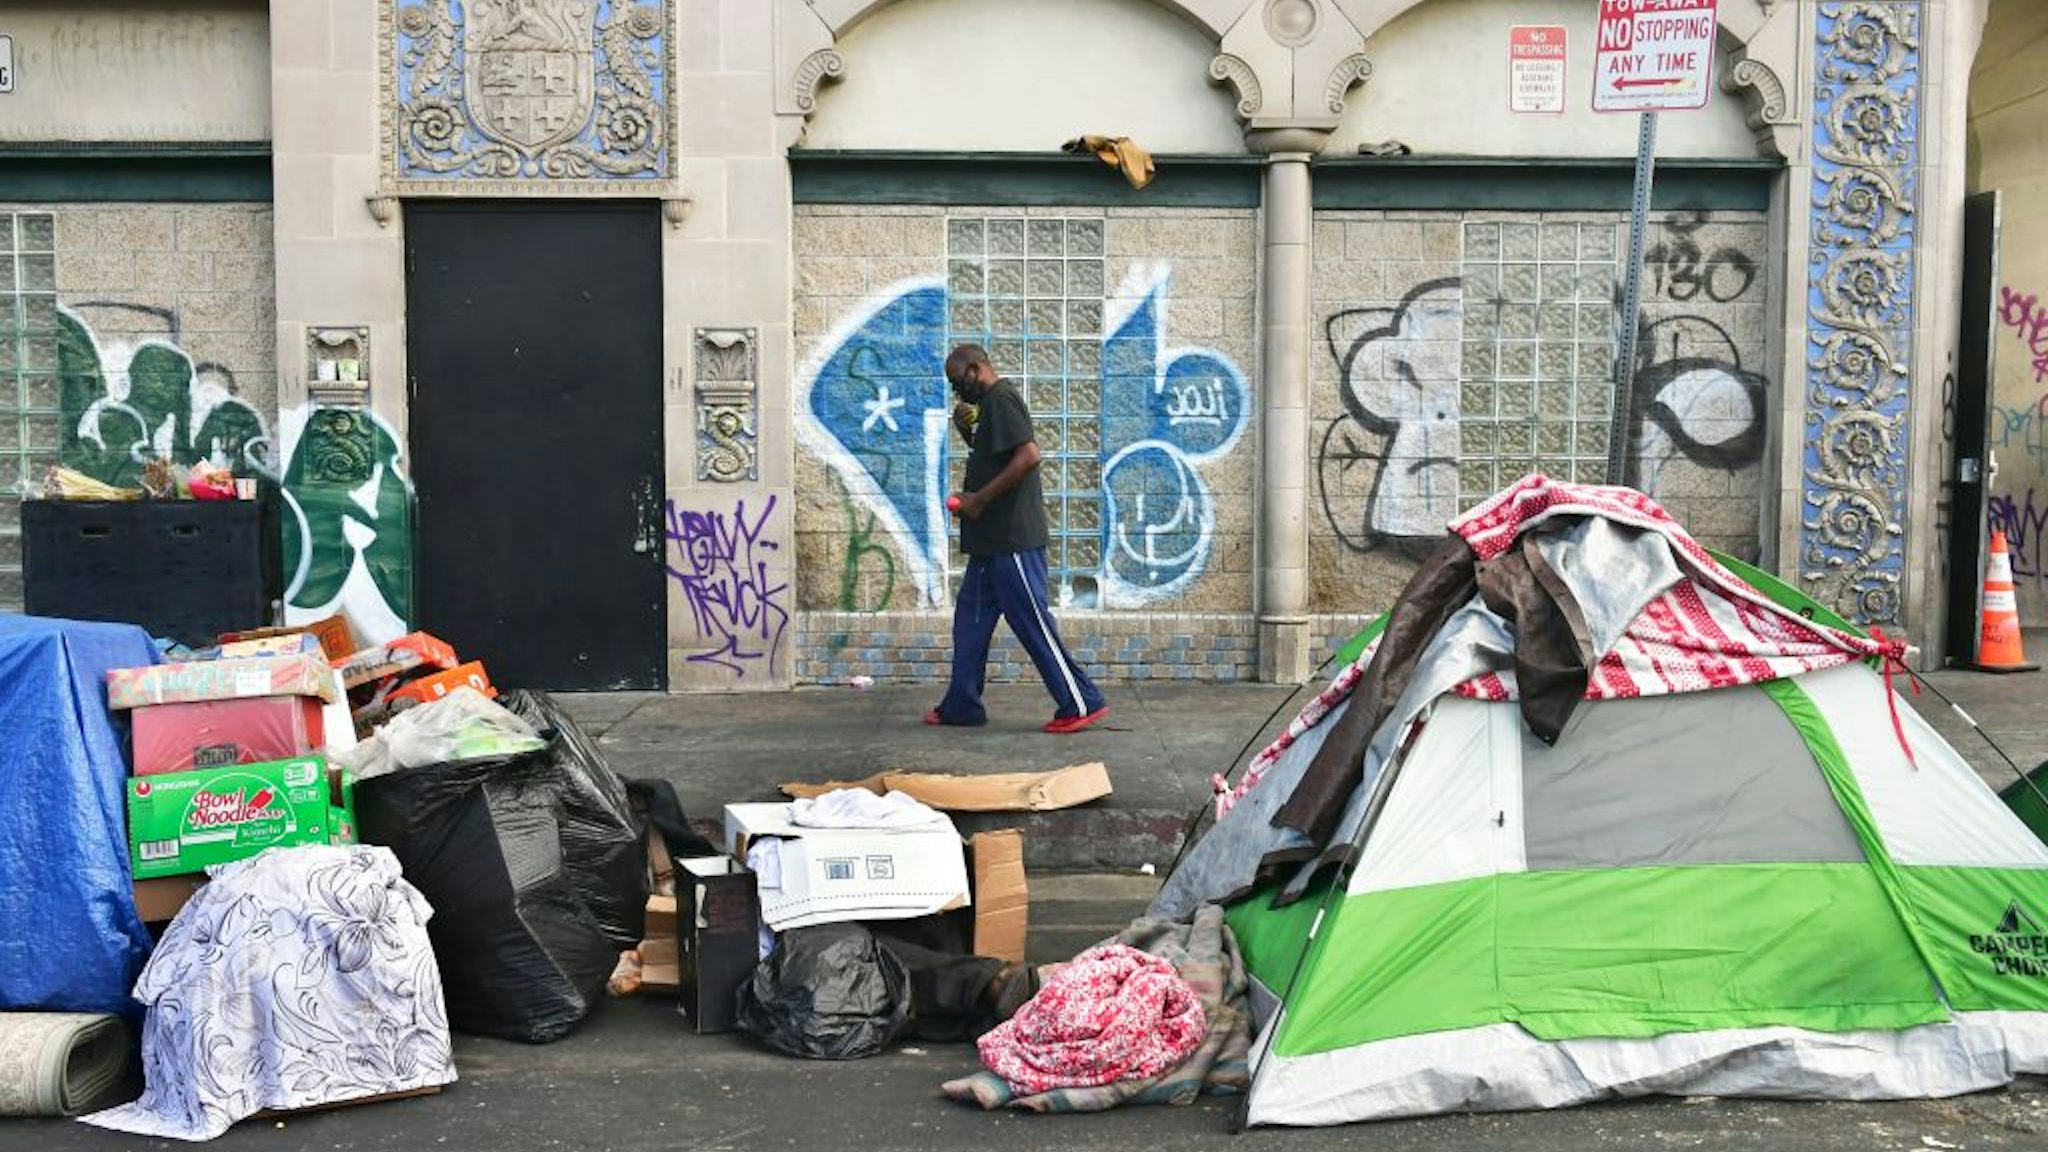 A man walks past tents housing the homeless on the streets in the Skid Row community of Los Angeles, California on April 26, 2021. - A federal judge overseeing a lawsuit that seeks to end the city's Skid Row homelessness crisis isn't backing down from his order requiring that all indigent persons in the area be offered shelter within six months. US District Judge David O. Carter is opening the door for more discussions by setting additional hearing dates and clarifying some portions of his ruling. (Photo by Frederic J. BROWN / AFP) (Photo by FREDERIC J. BROWN/AFP via Getty Images)